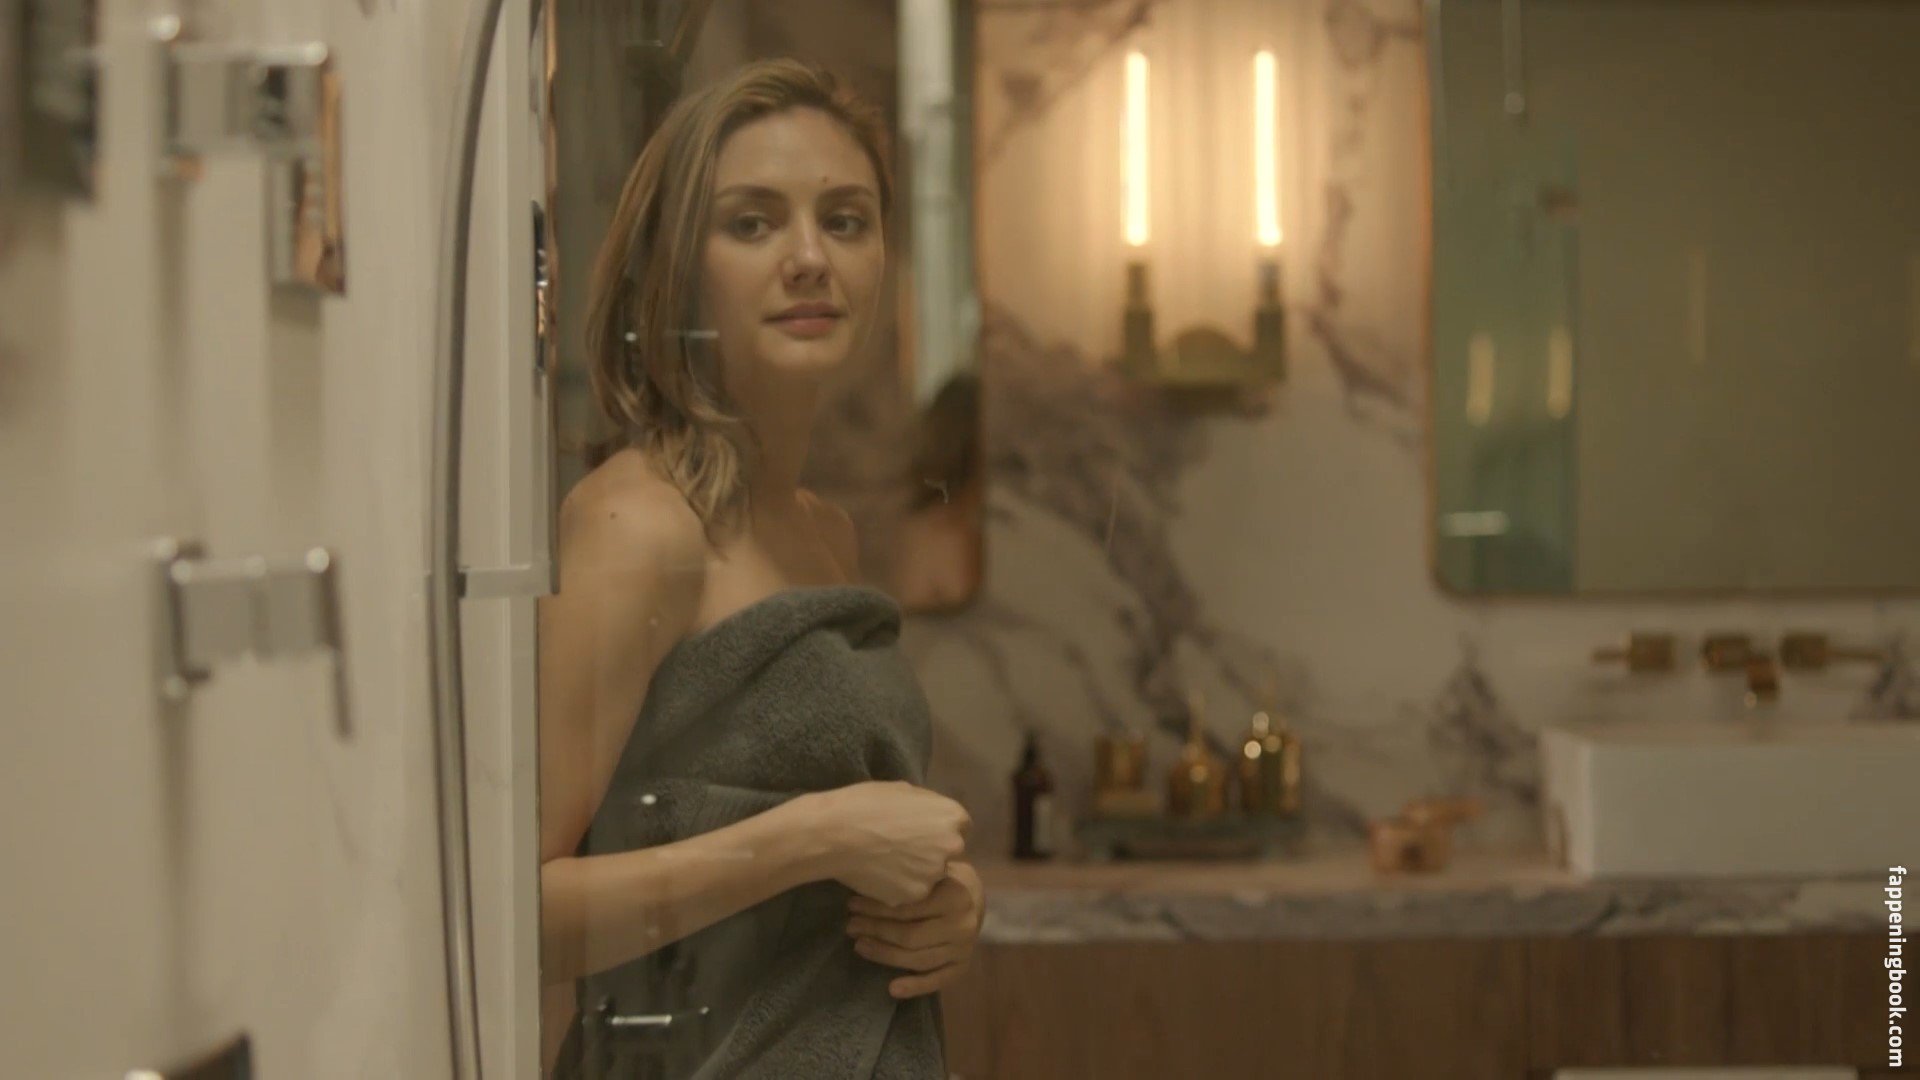 Christine Evangelista Nude, The Fappening - Photo #126212 - FappeningBook.